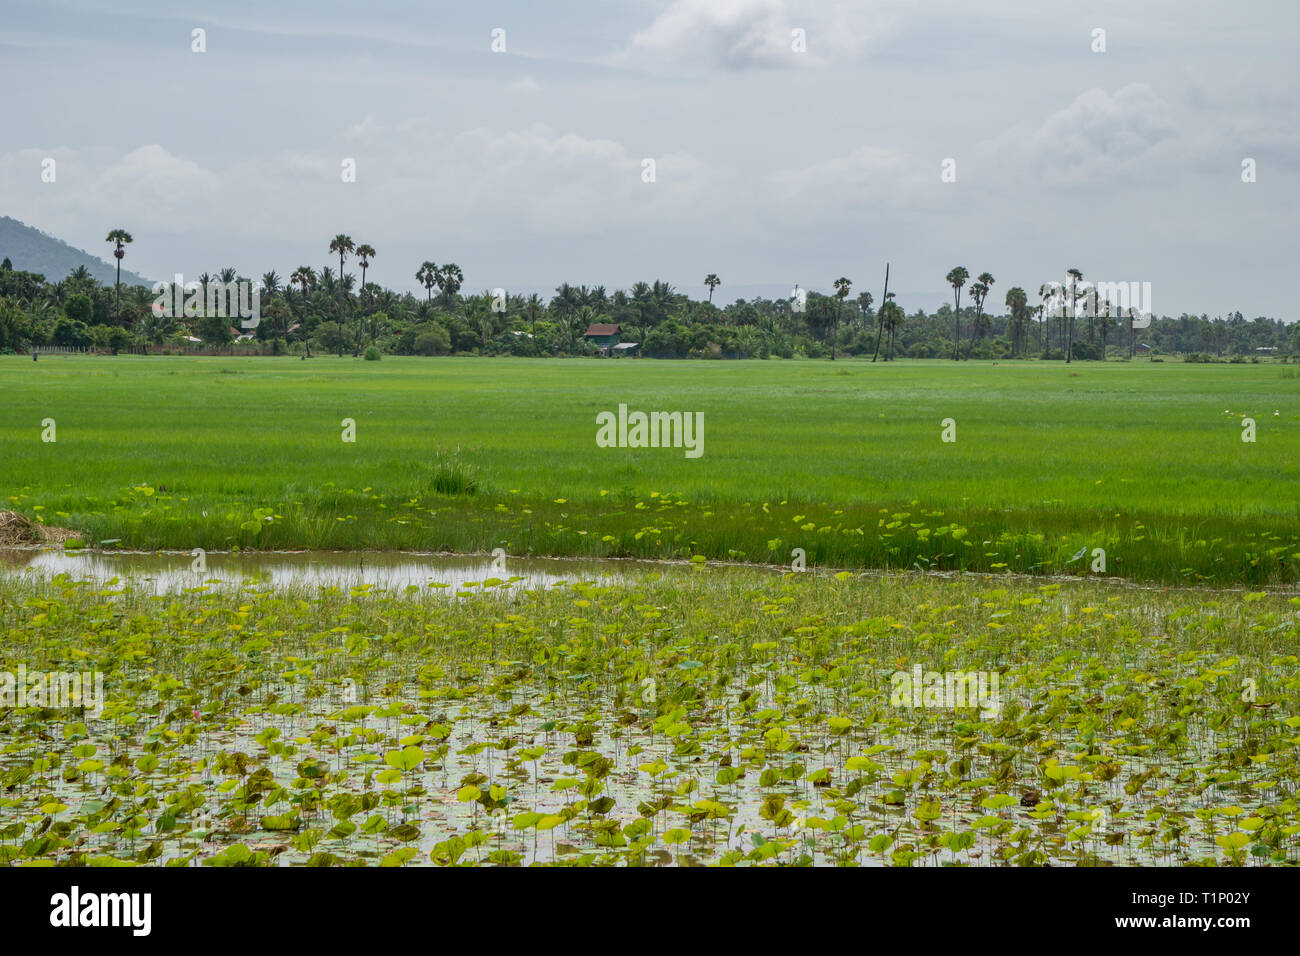 A Pond Filled With Lotus Flowers In The Foreground With Vibrant Green Rice Fields In The Background And Palm Trees On The Horizon Stock Photo Alamy